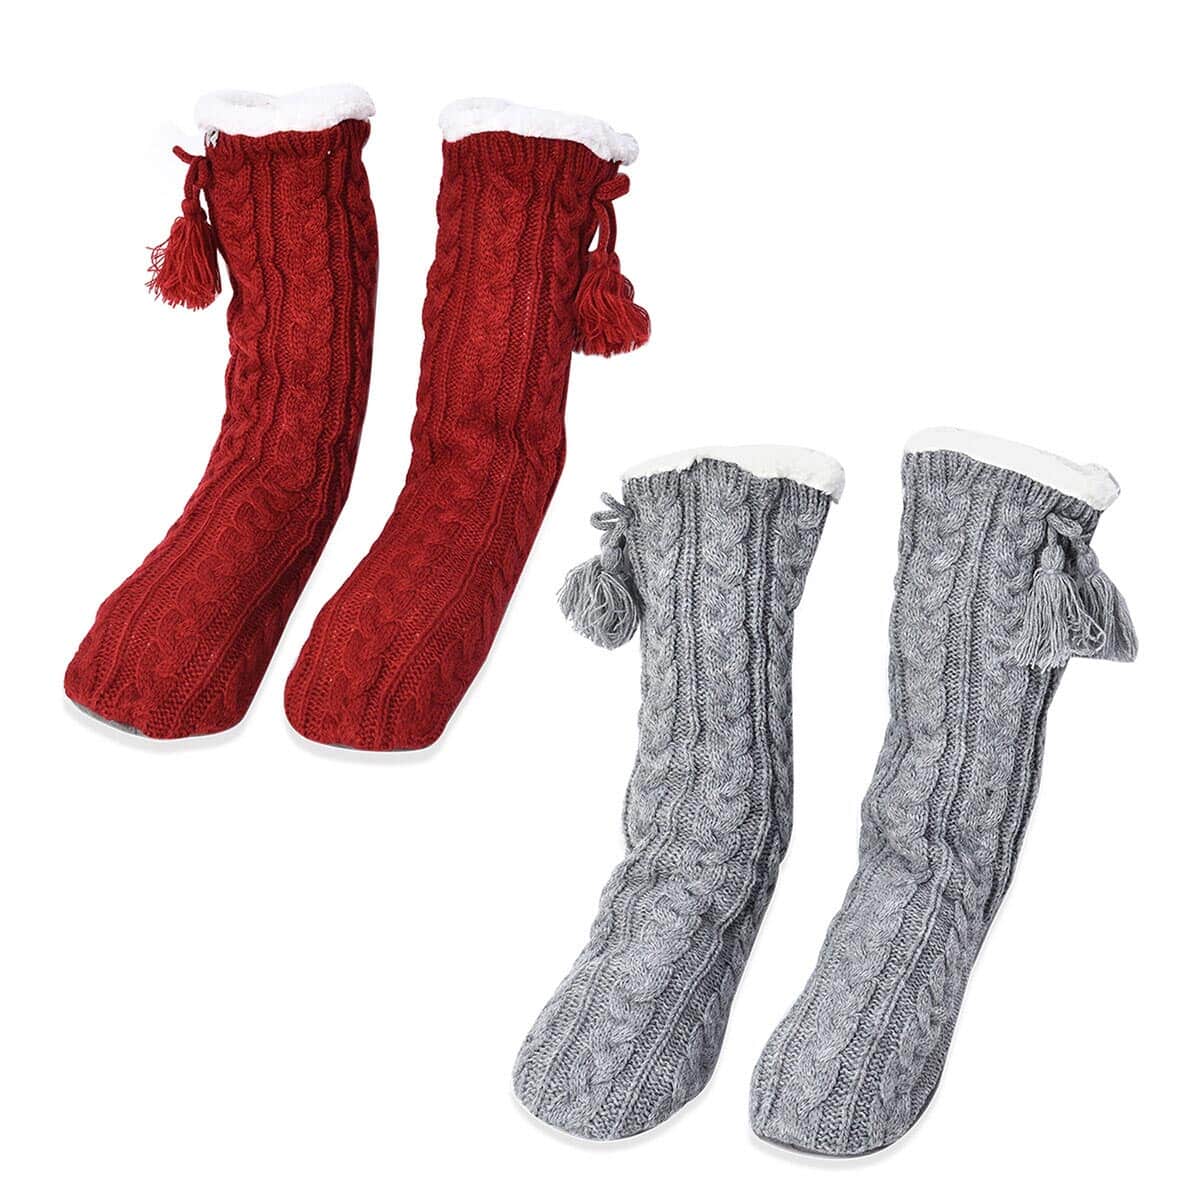 Set of 2 Warm & Fuzzy Red & Gray Cable Knitted Sherpa Lined Slipper Socks (Women's Size 5-10) image number 0